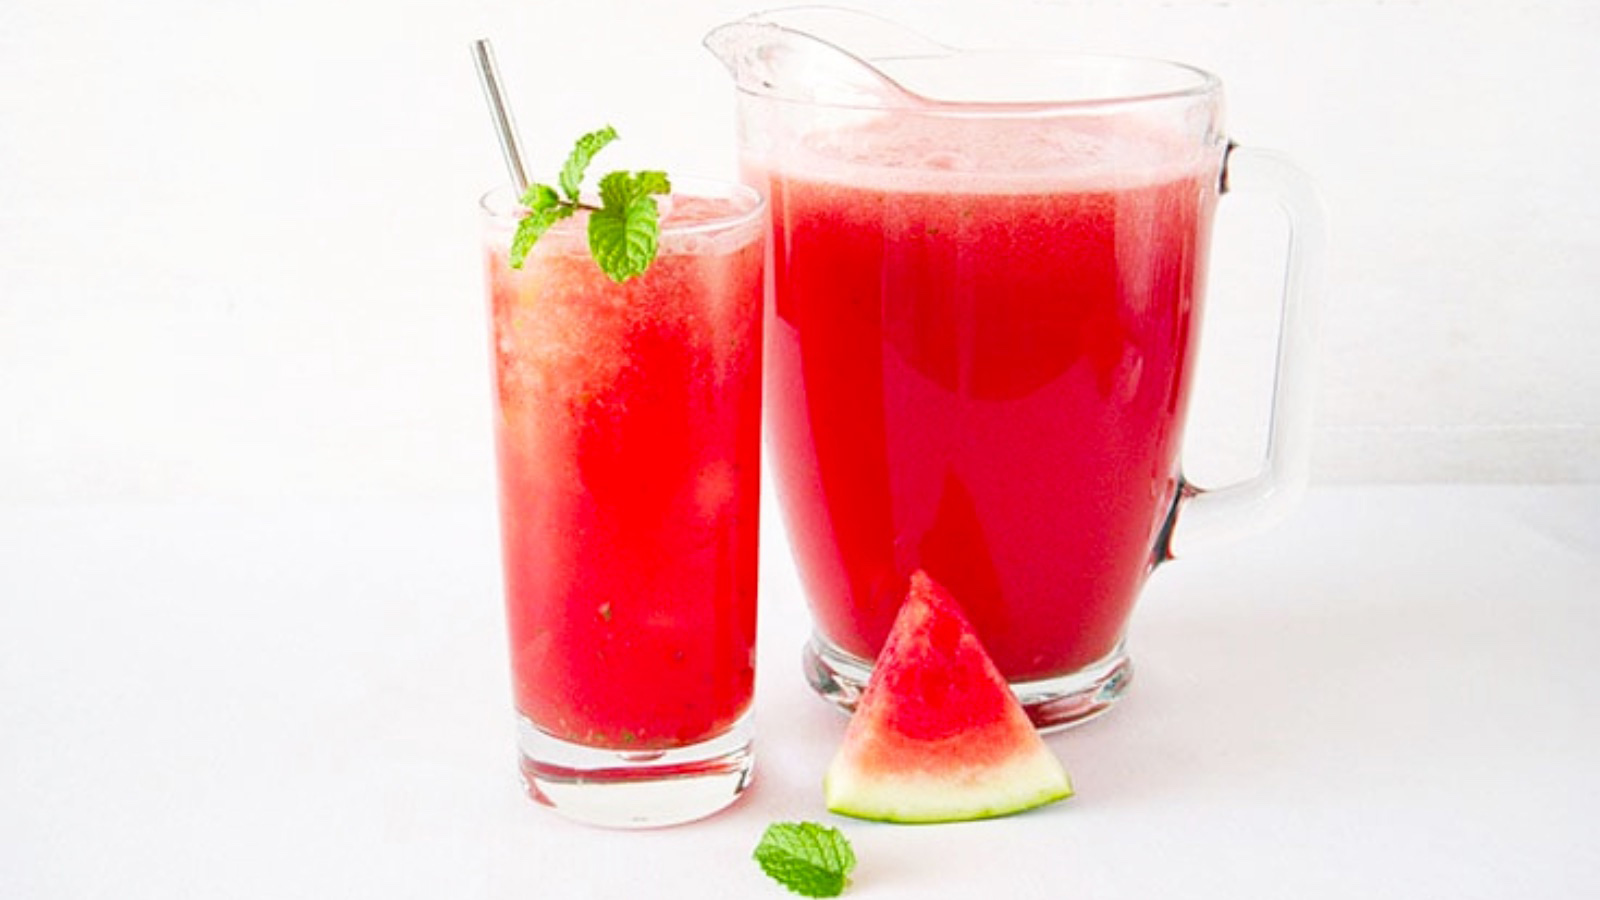 A glass and pitcher on a white surface both sit full of watermelon aqua fresca. The glass is garnished with a fresh mint sprig and a metal straw.